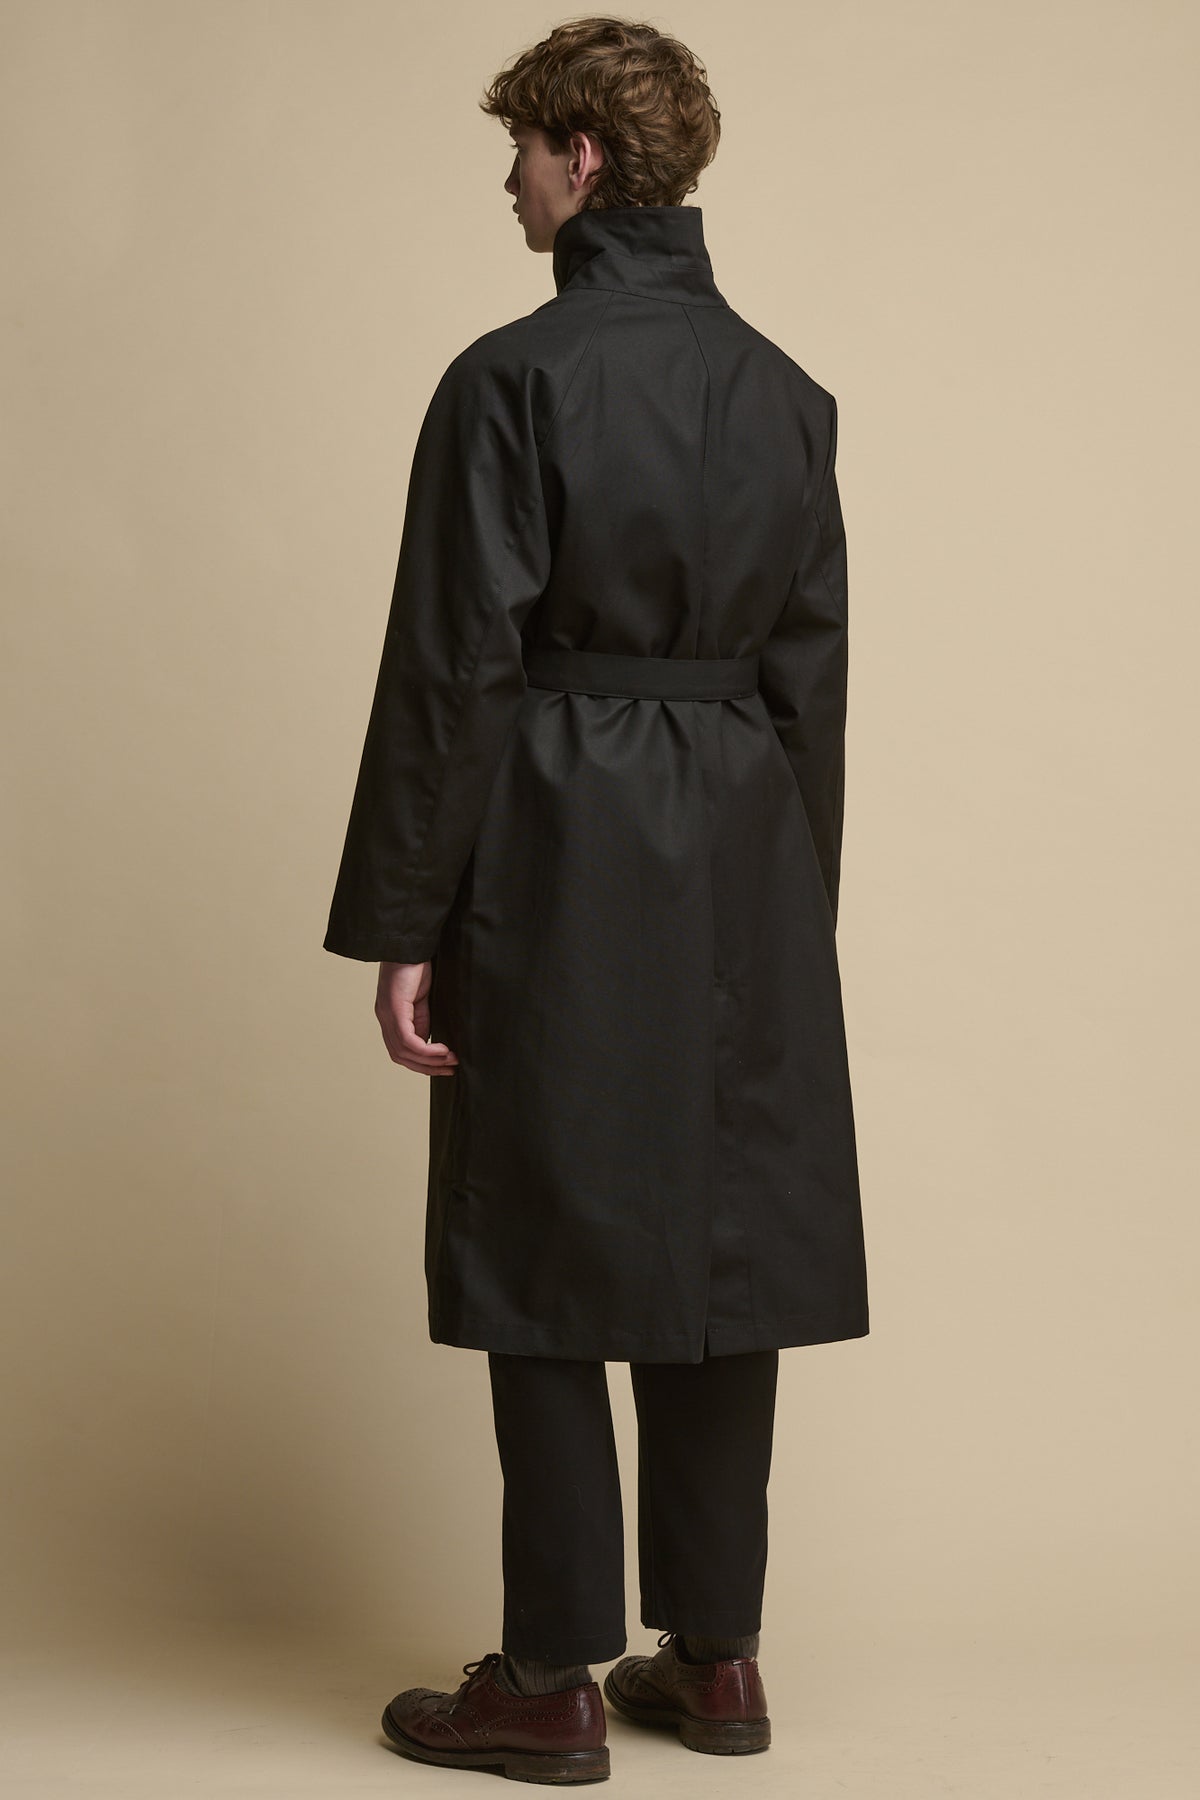 
            The back of male wearing Frank Raglan Belted Raincoat in black with collar up 